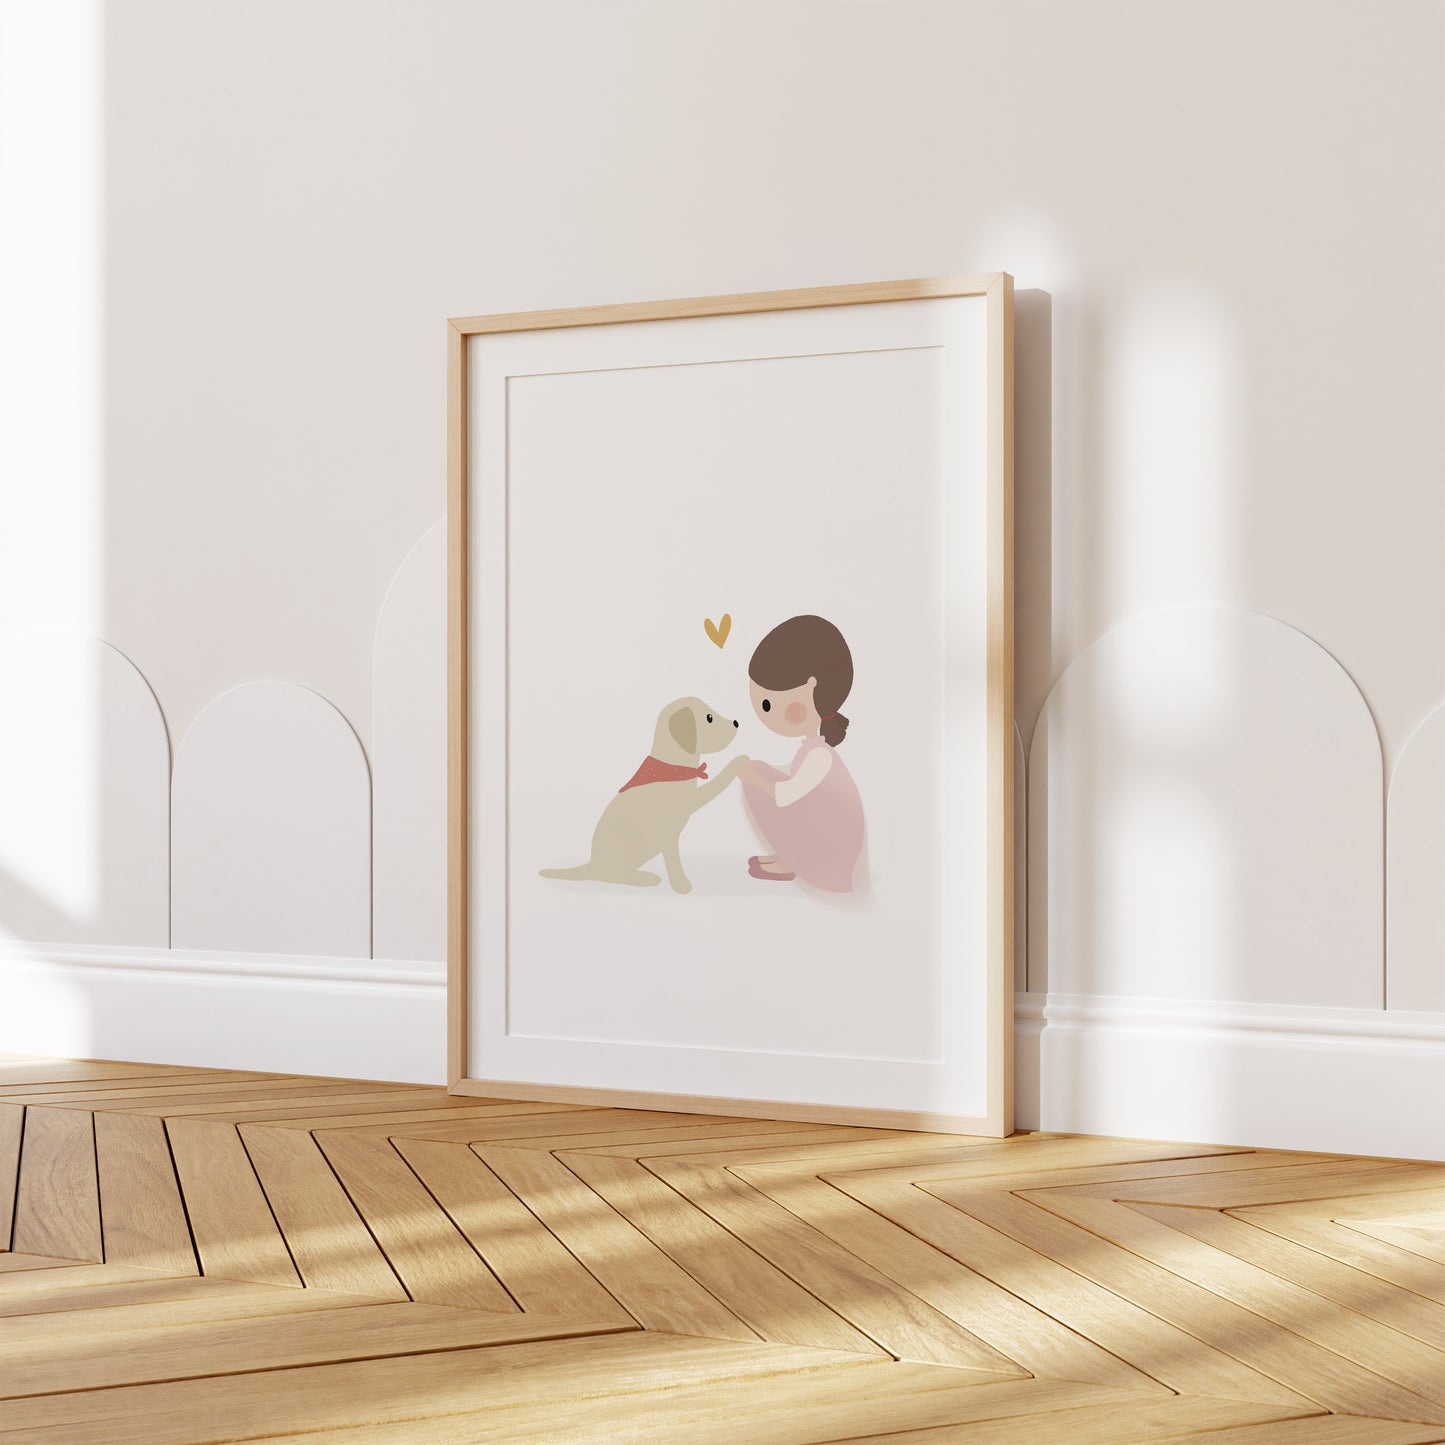 A beautifully illustrated art print featuring a little girl with her dog. This poster certainly brings joy and tenderness to your walls with soft pastel colors.